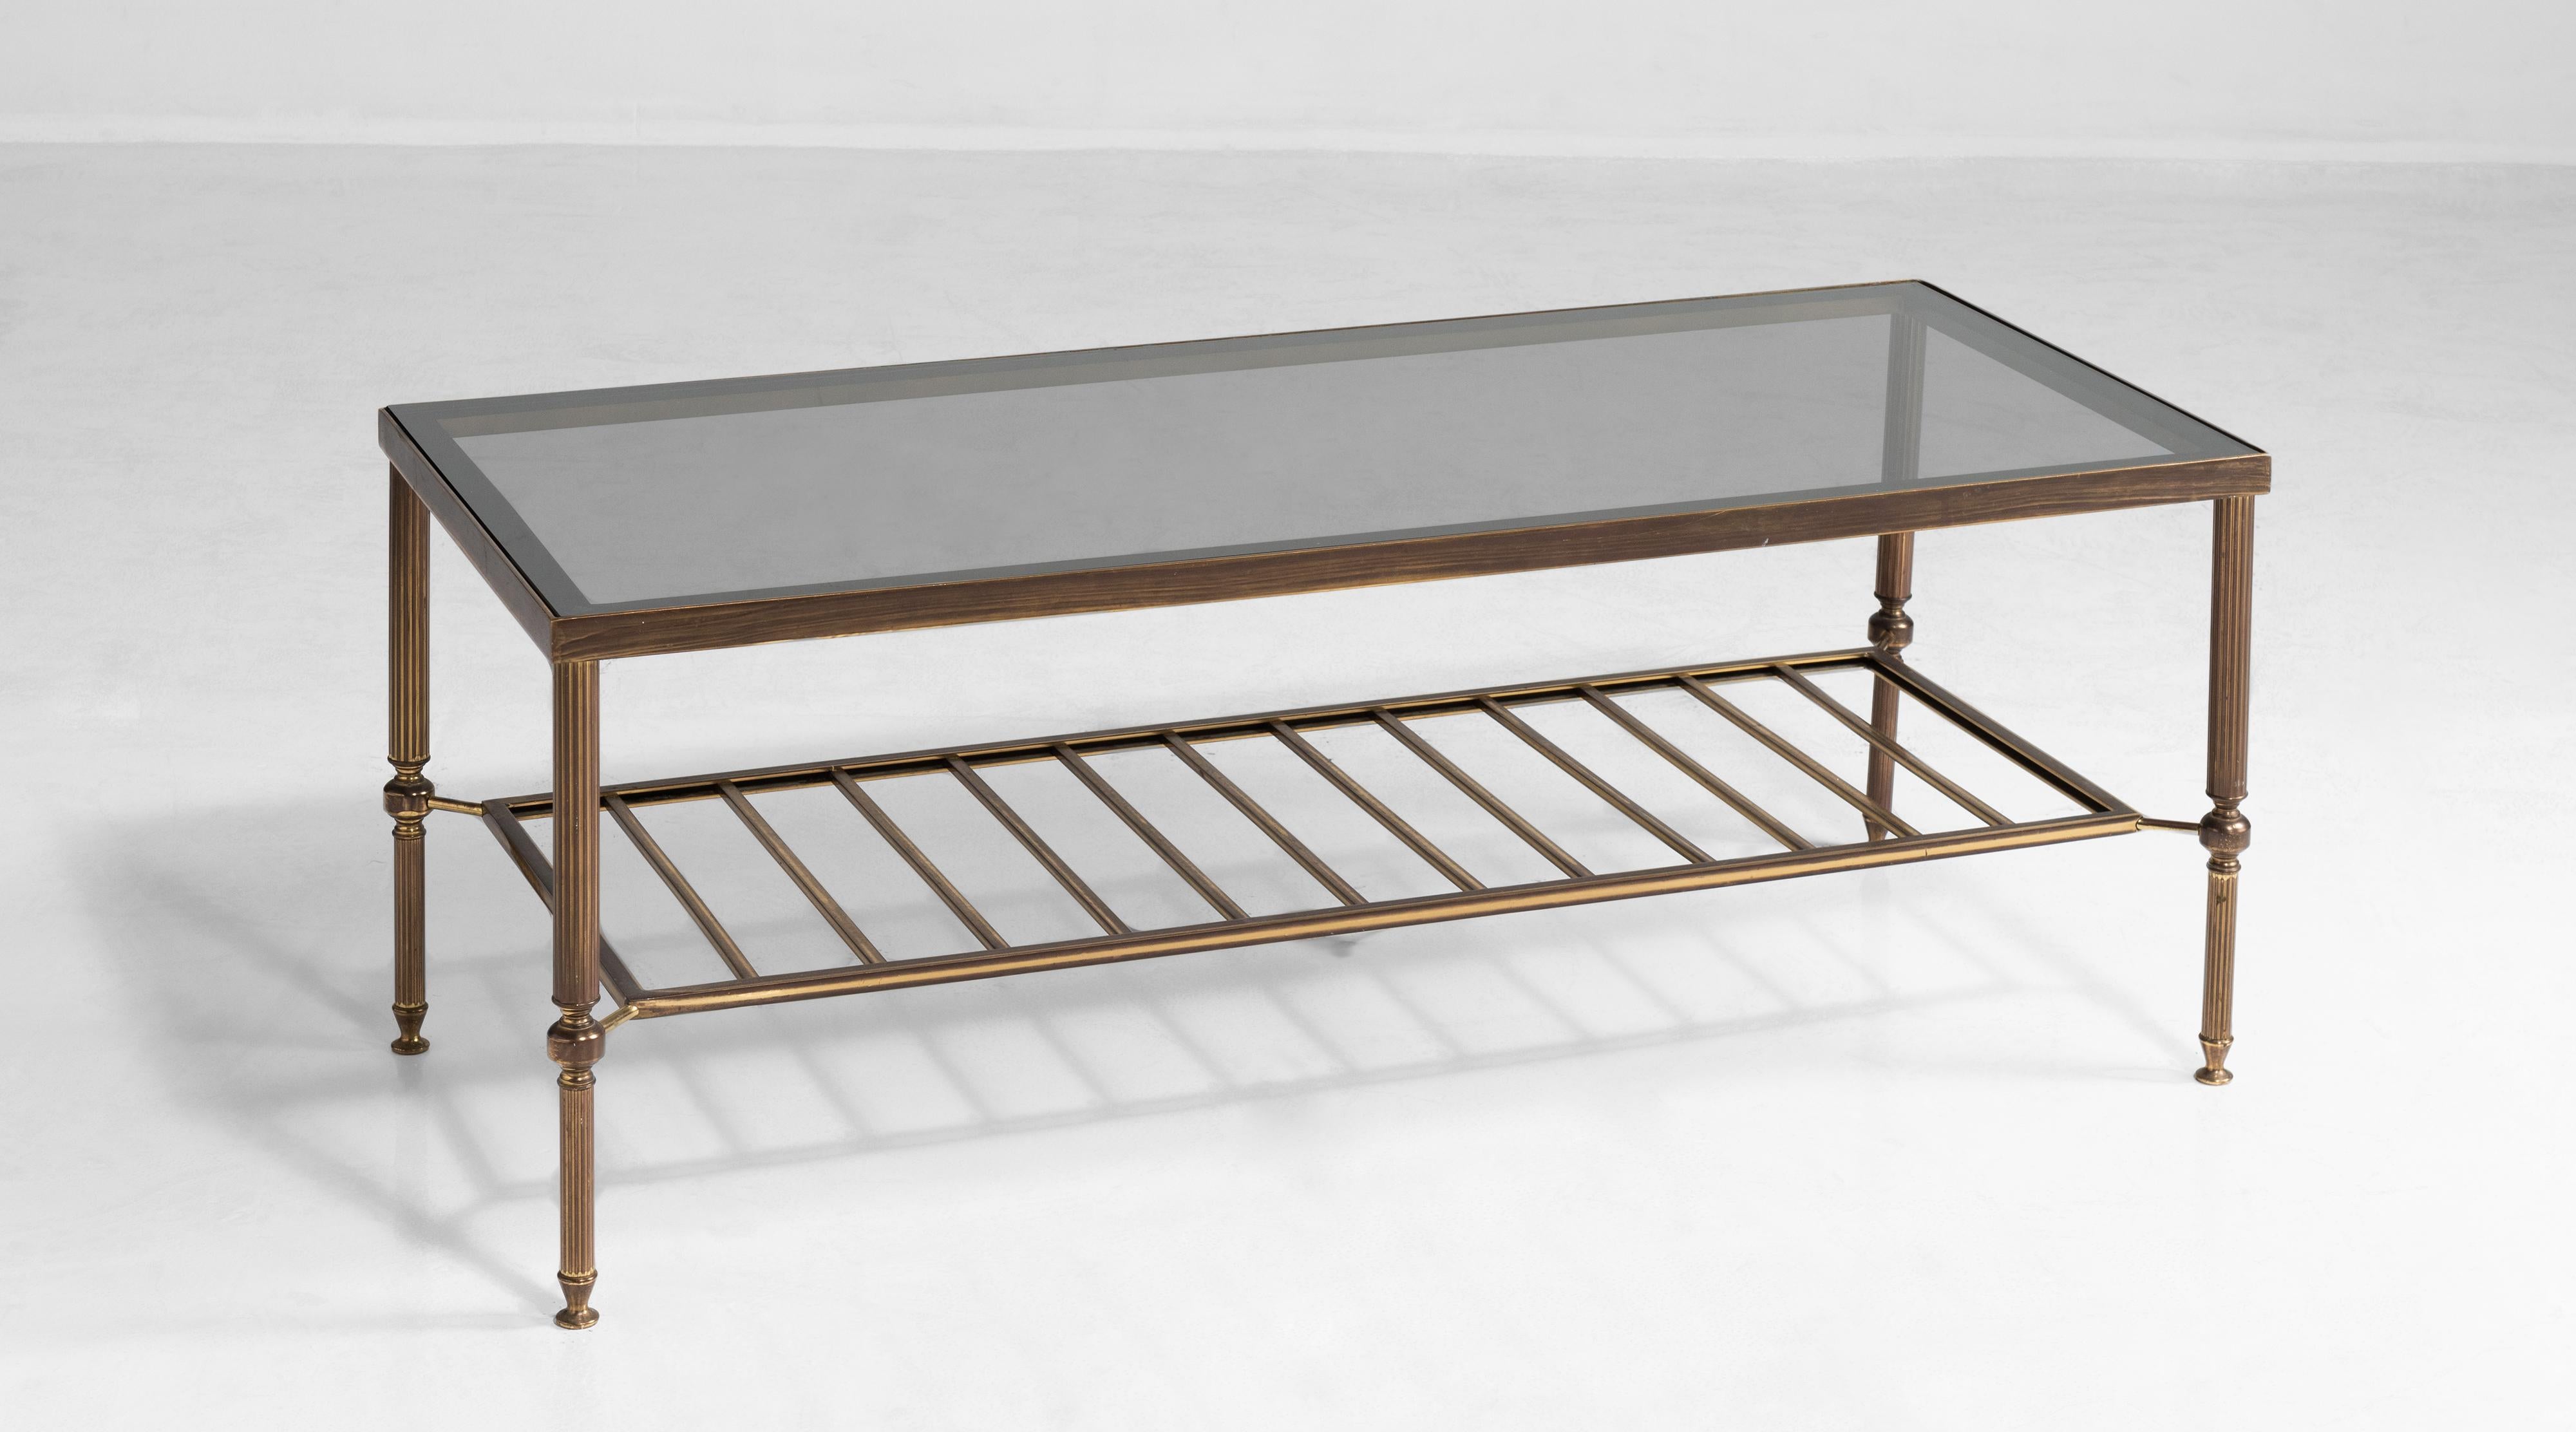 Brass and smoked glass coffee table, France, circa 1950.

Brass frame with original Rankin Royal smoked glass top. Rankin Royal has been manufacturing glass in France since 1830 and hold the royal warrant.